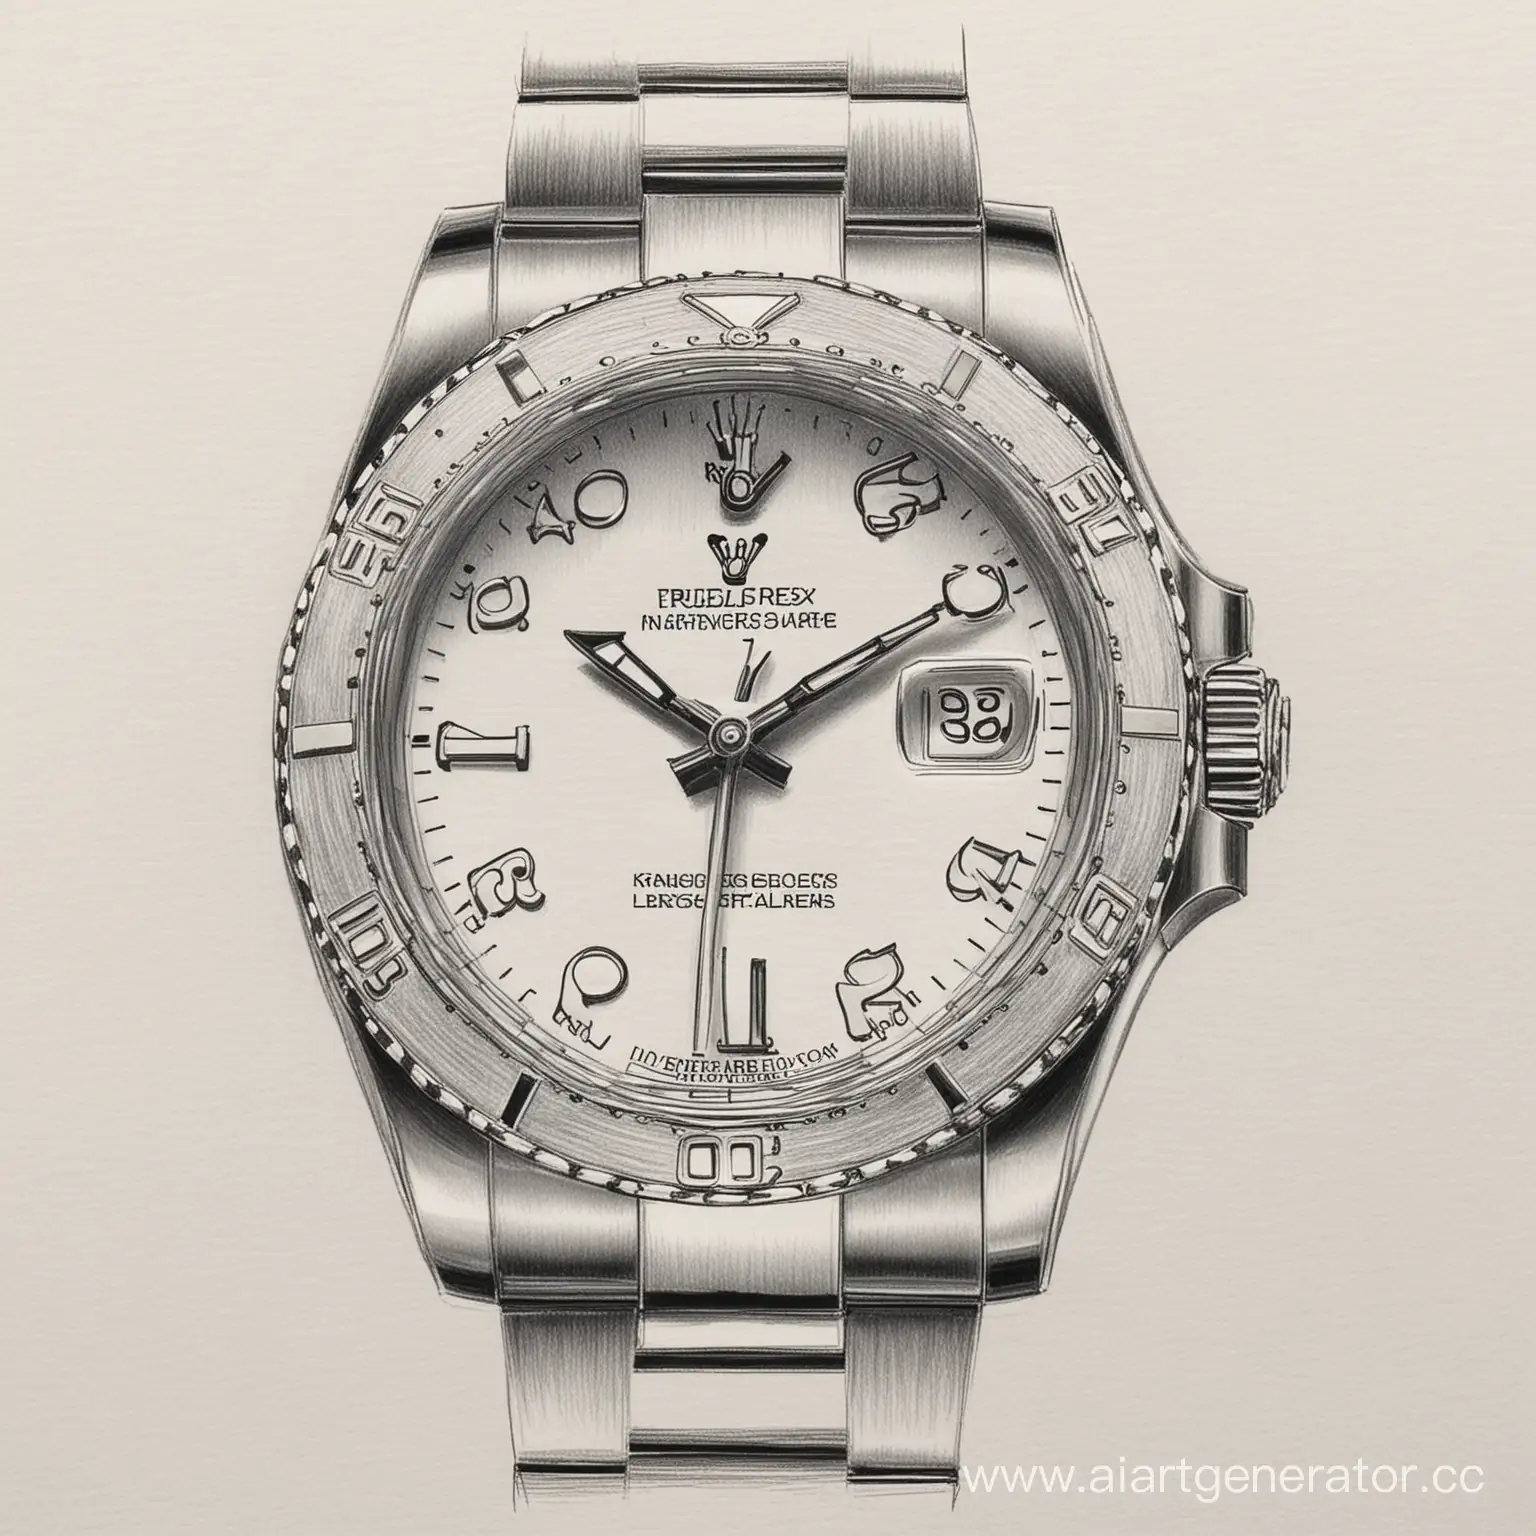 Luxury-Timepieces-Illustration-of-Rolex-Watches-Without-Logos